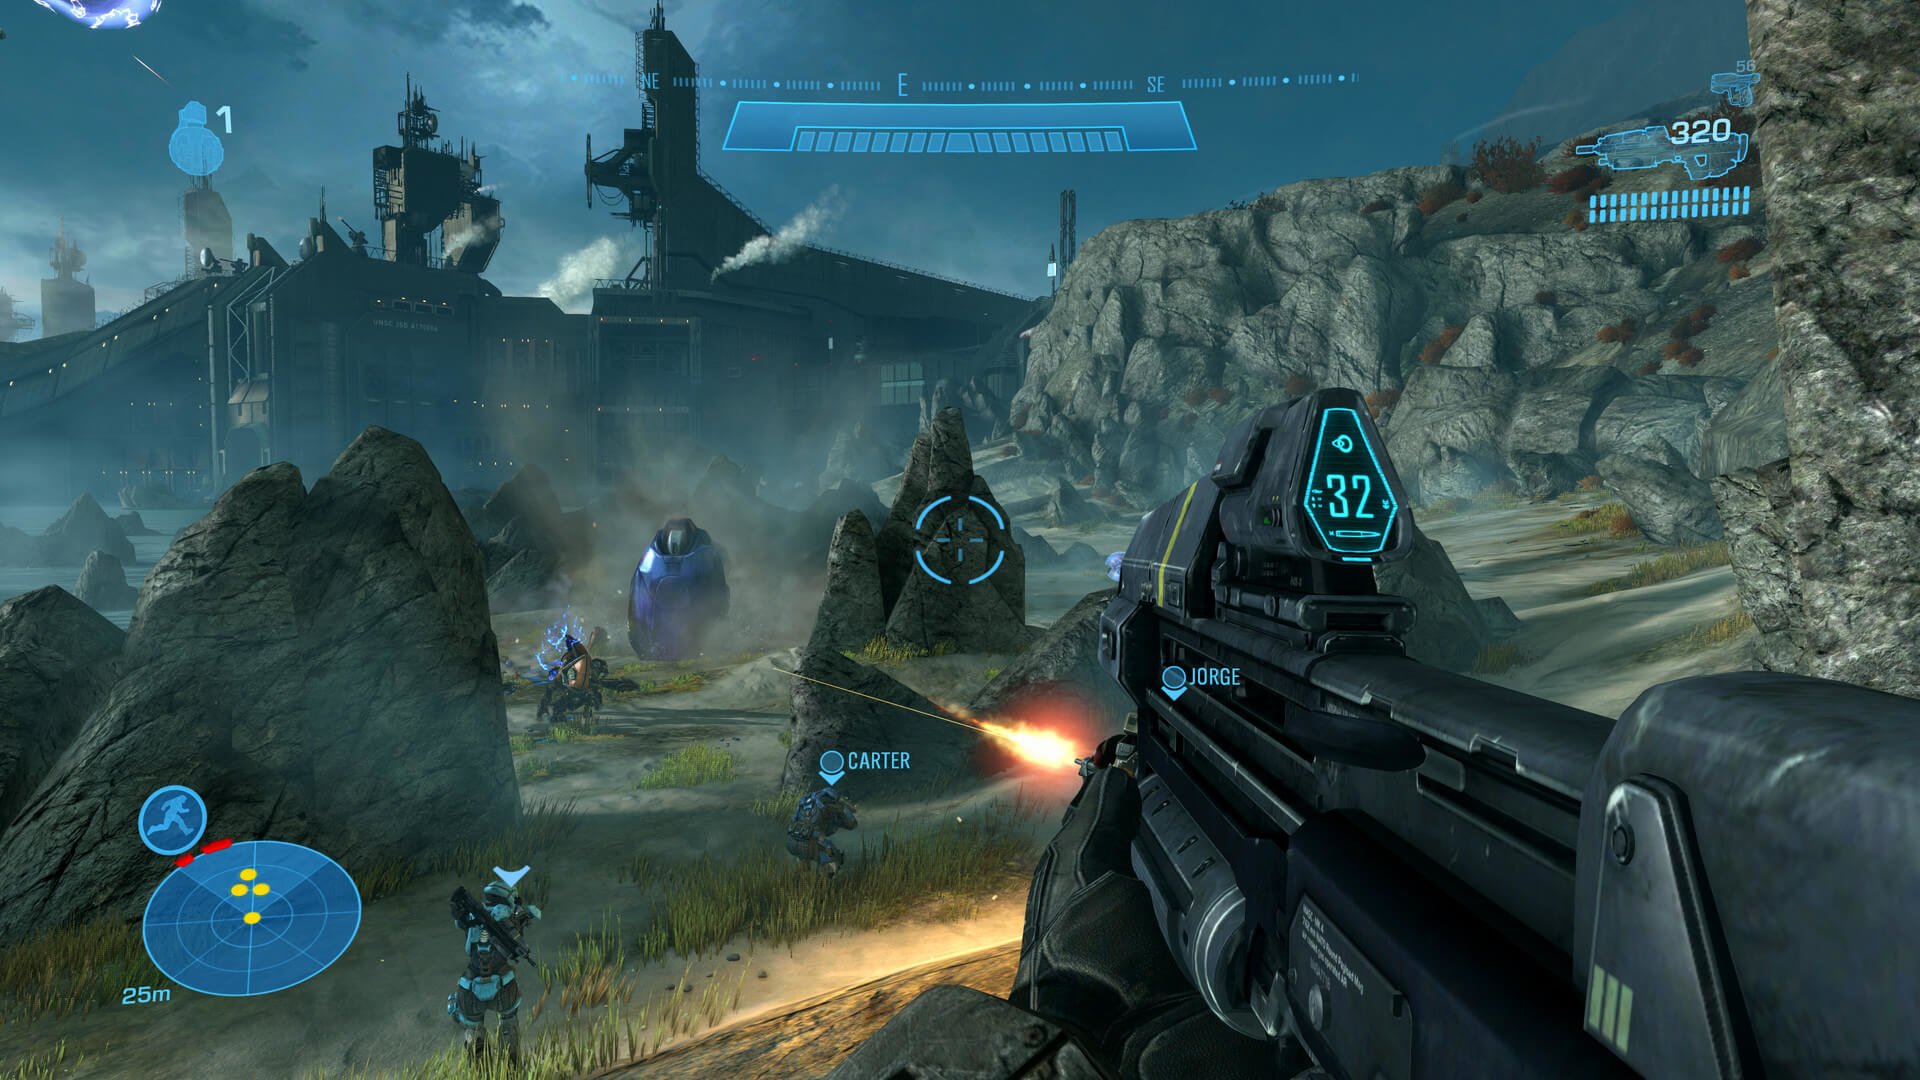 Halo The Master Chief Collection Halo Reach Screenshot 4